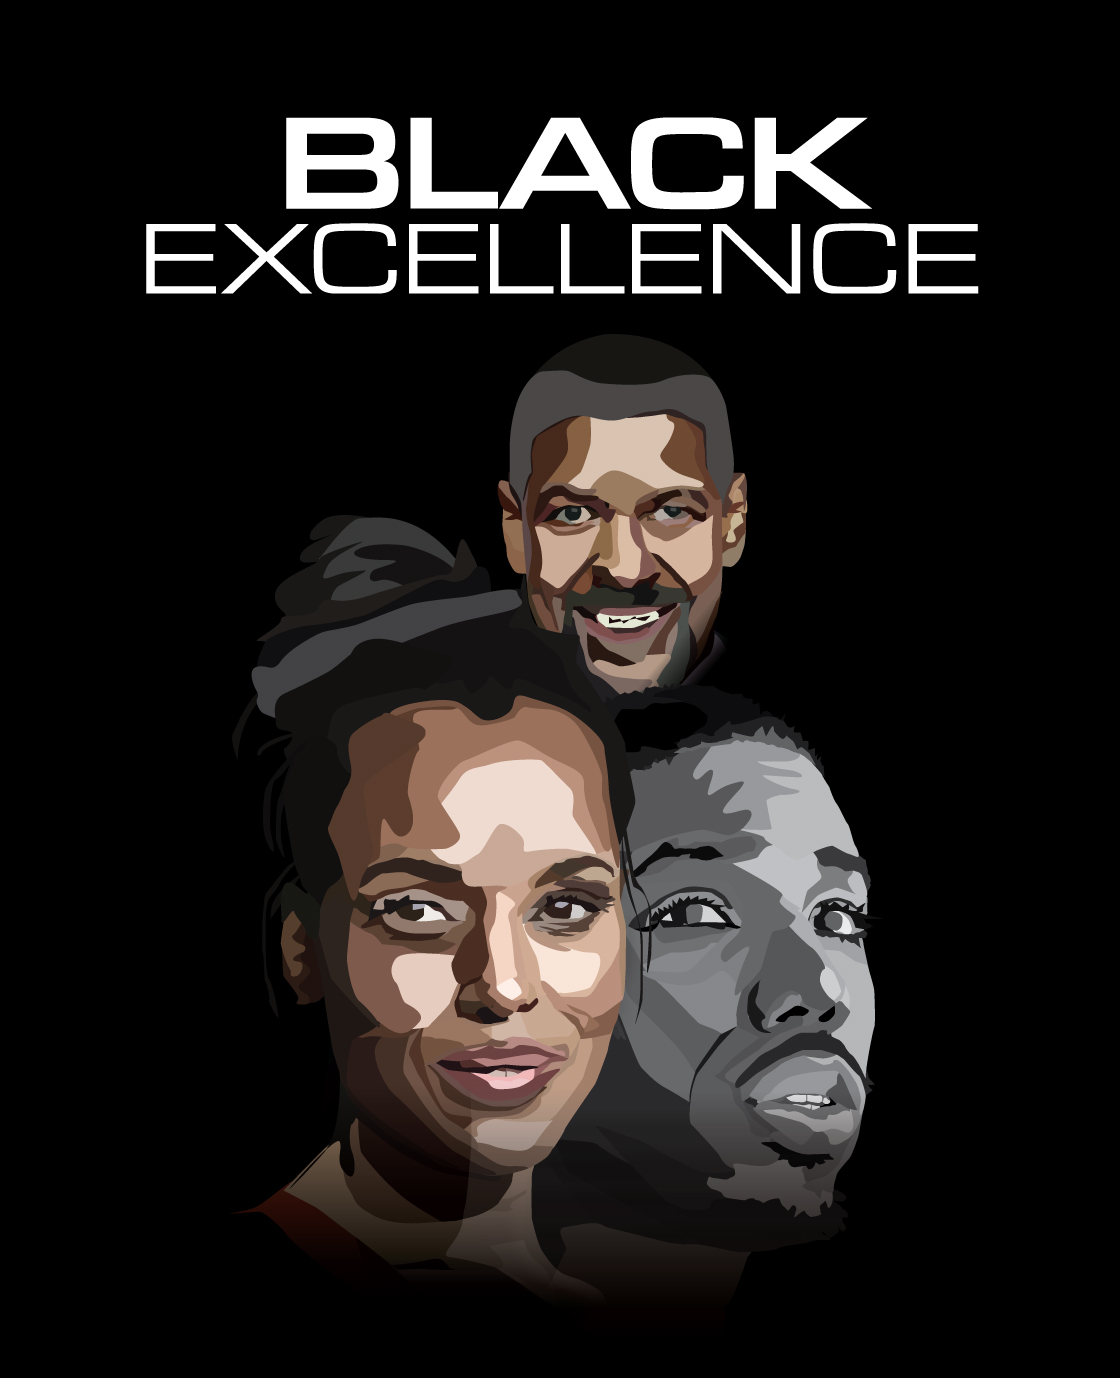 BlackExcellence Illustrated by/ Abbas Ghor